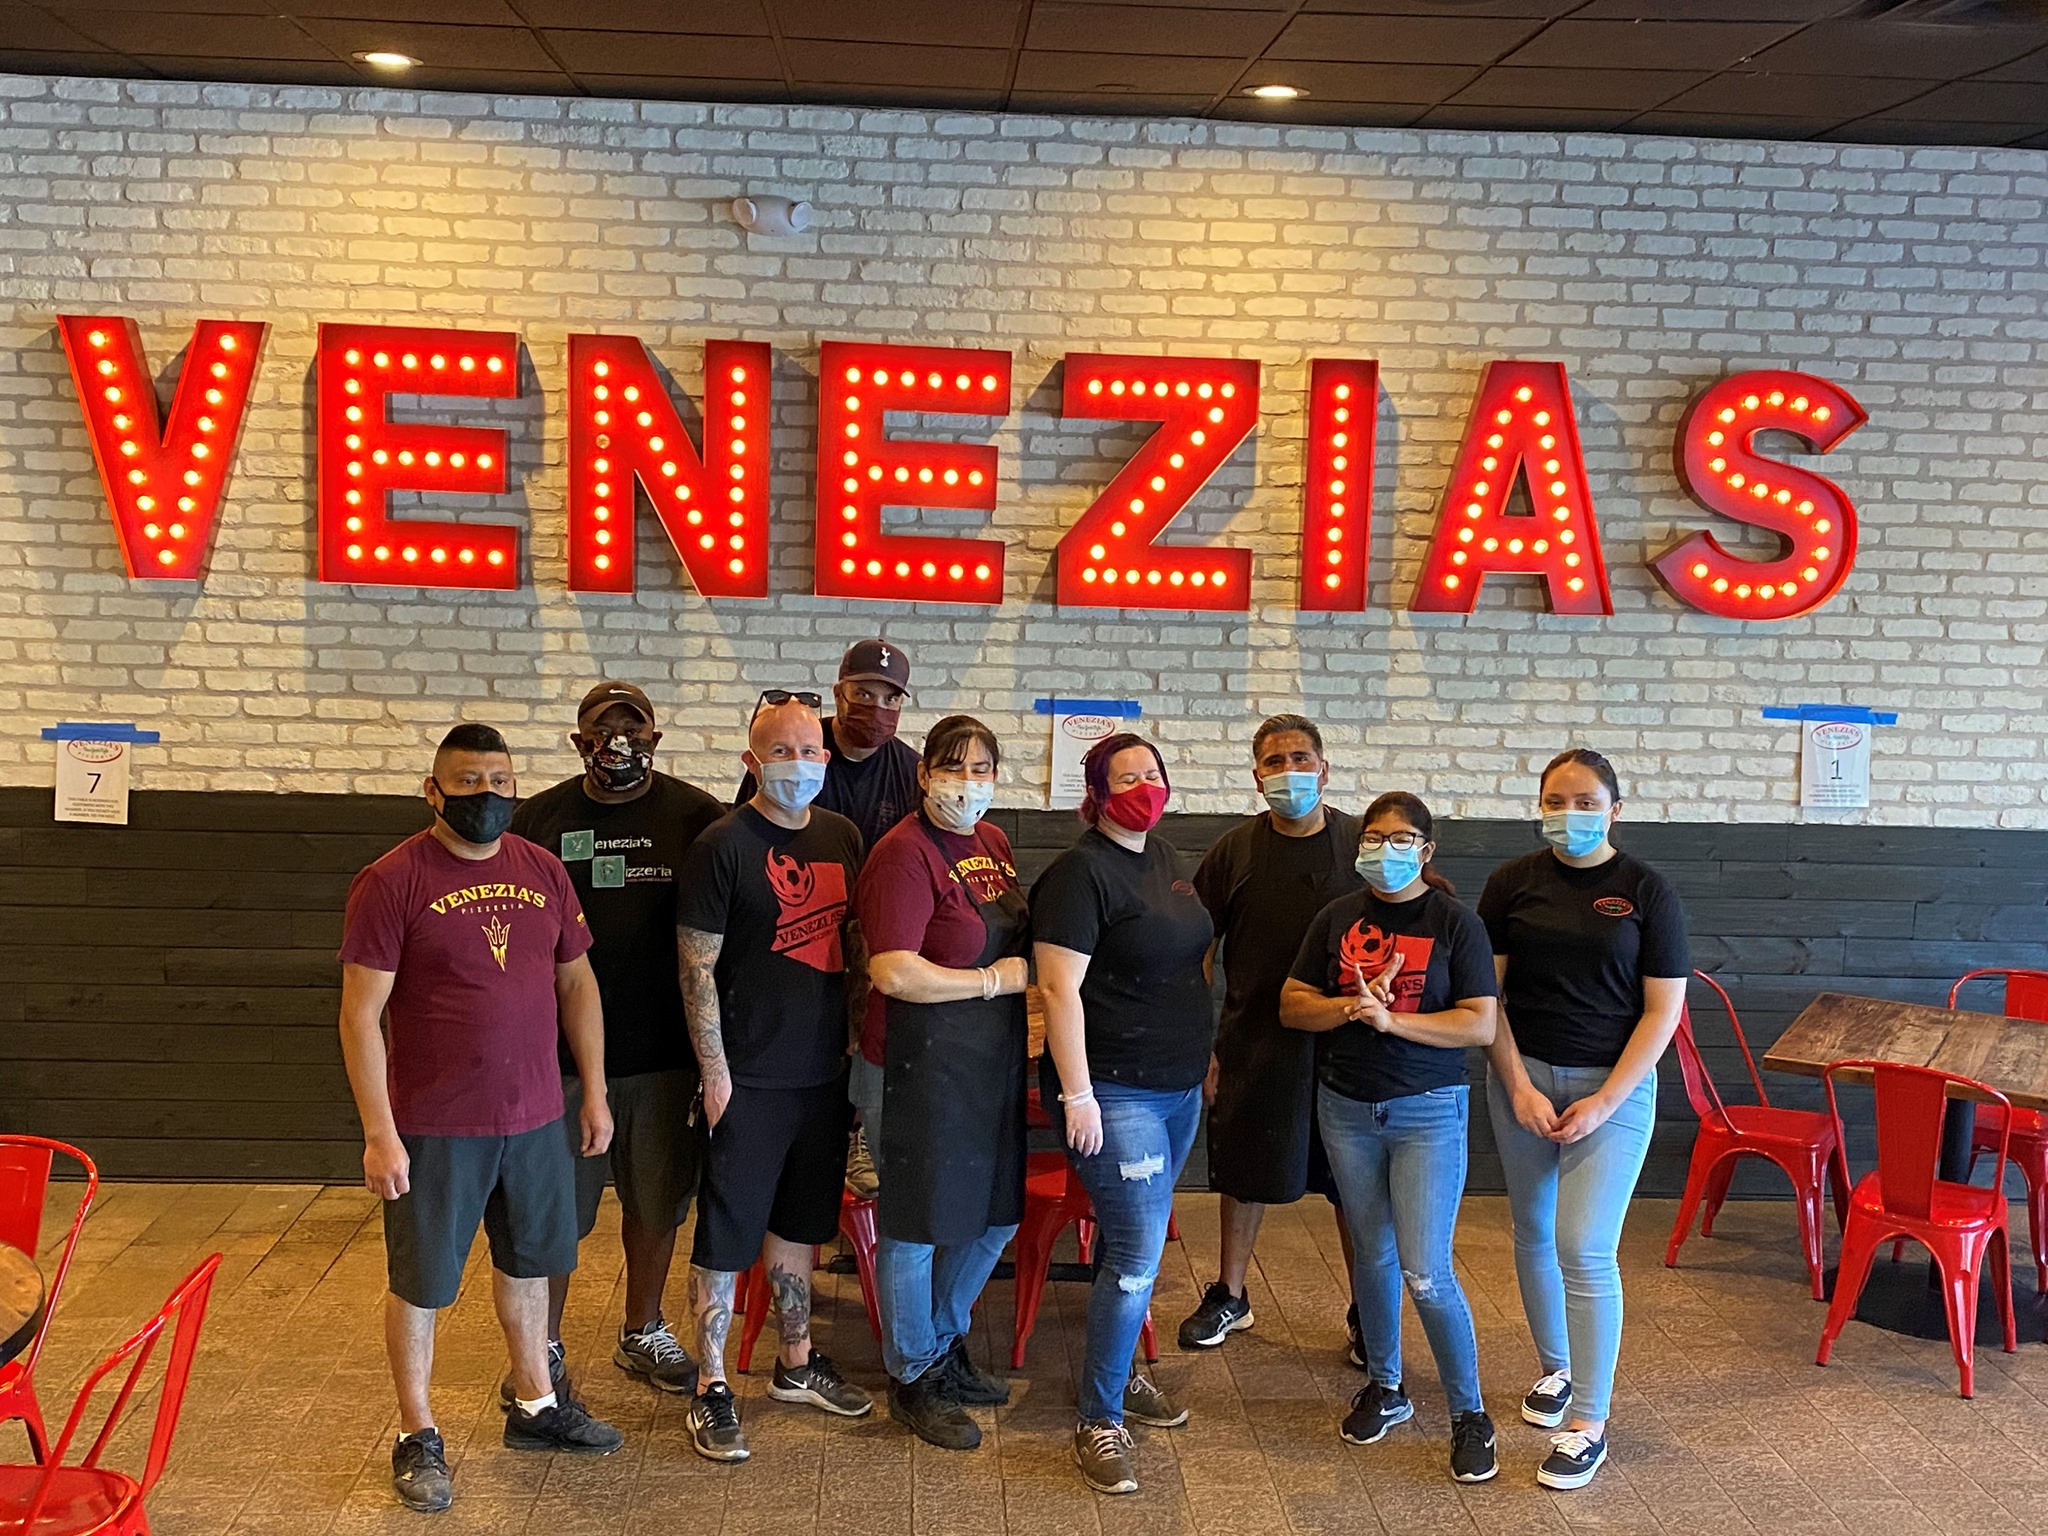 Venezia's Pizzeria staff standing in front of their sign